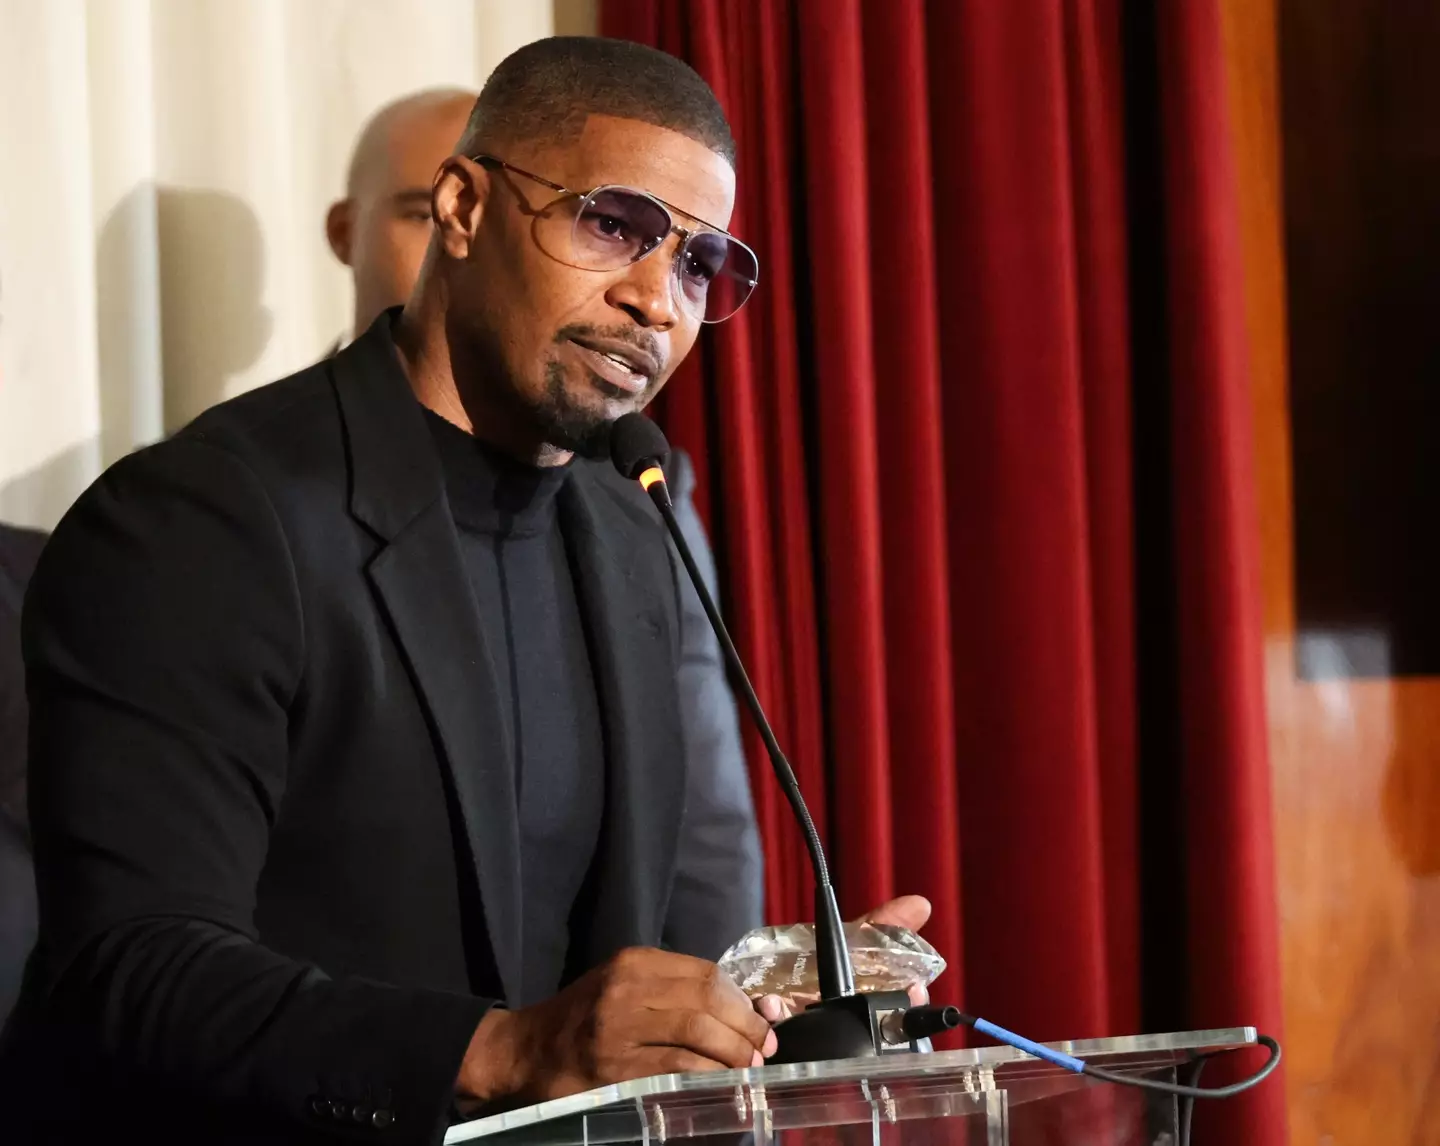 Jamie Foxx told the audience at the AAFCA that he'll open up about his situation soon. (Kayla Oaddams/Getty Images)